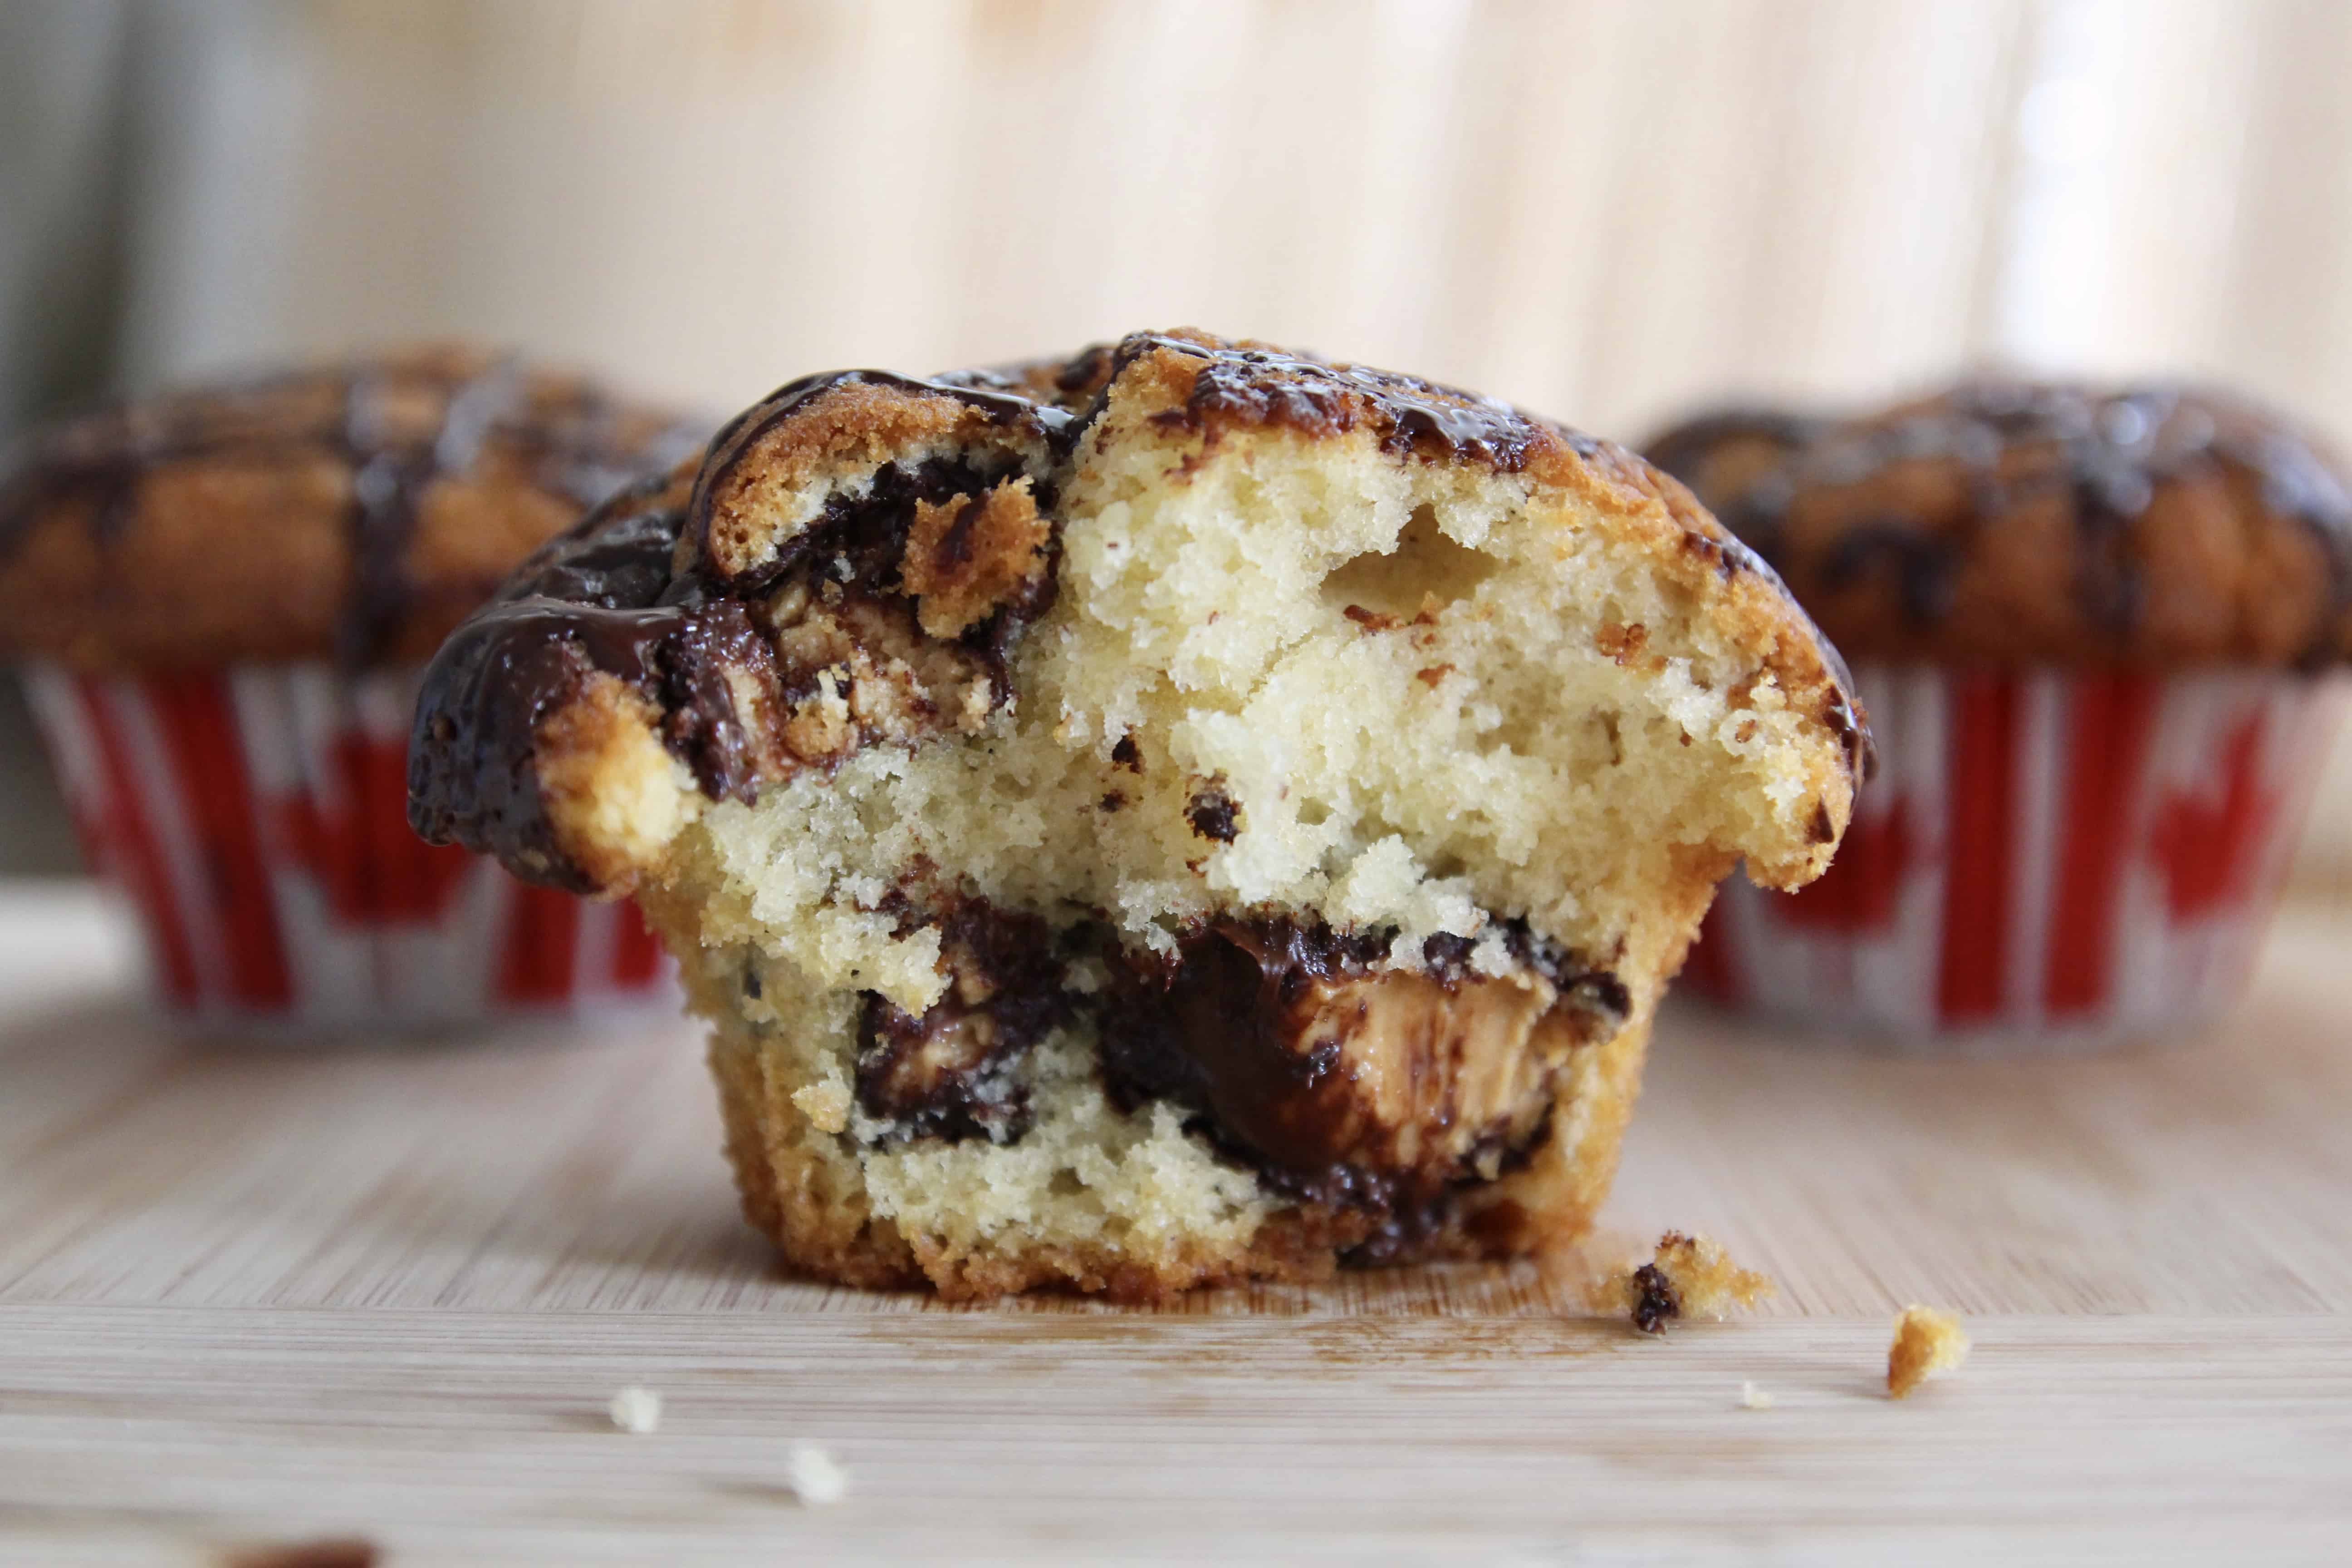 Moose Tracks Muffins (Peanut Butter Cup Muffins)